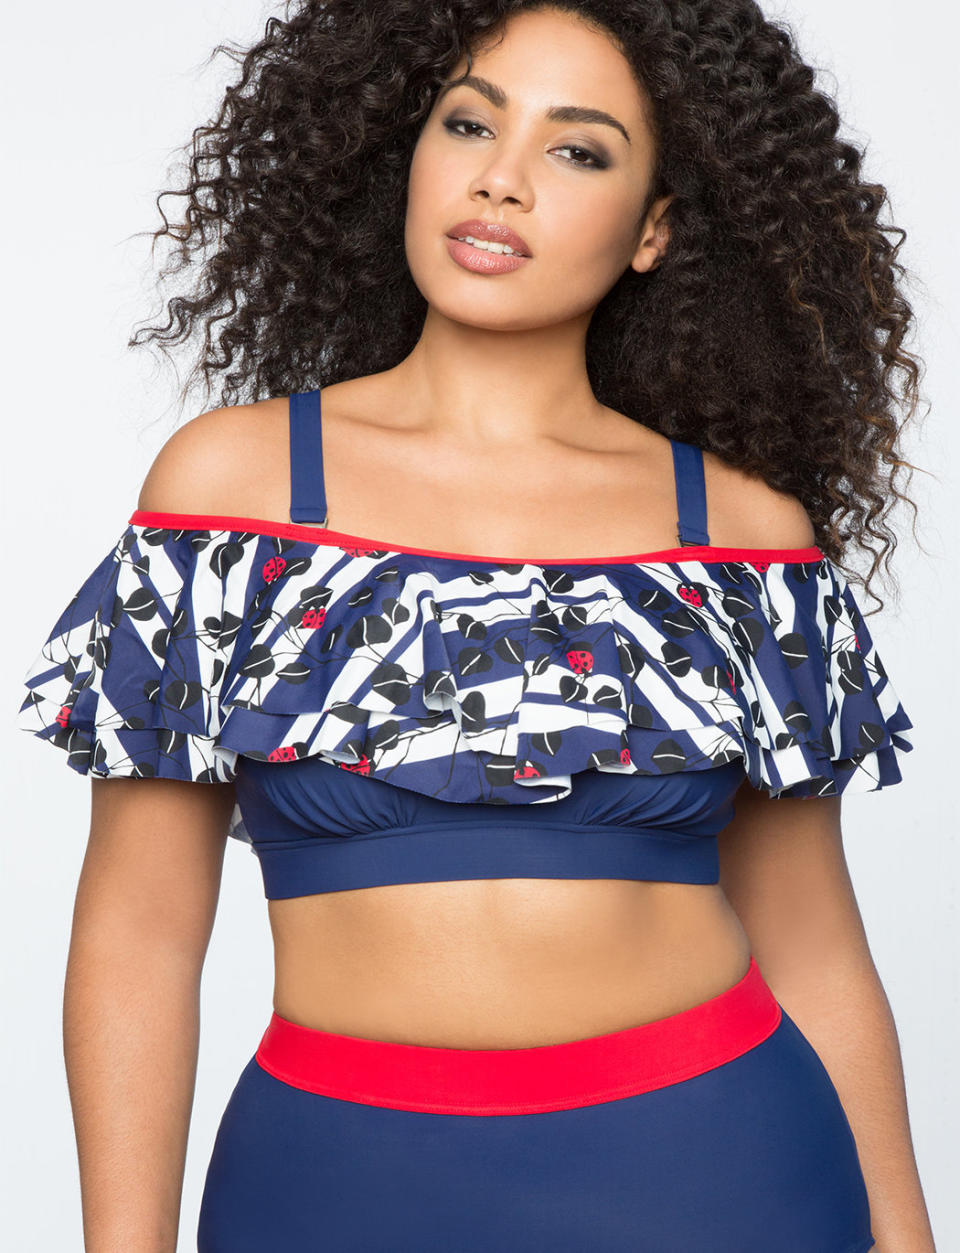 Get the suit <a href="http://www.eloquii.com/off-the-shoulder-ruffle-bikini-top/1645737.html?q=off%20the%20shoulder%20swimsuit&amp;dwvar_1645737_colorCode=32&amp;start=50" target="_blank">here</a>.